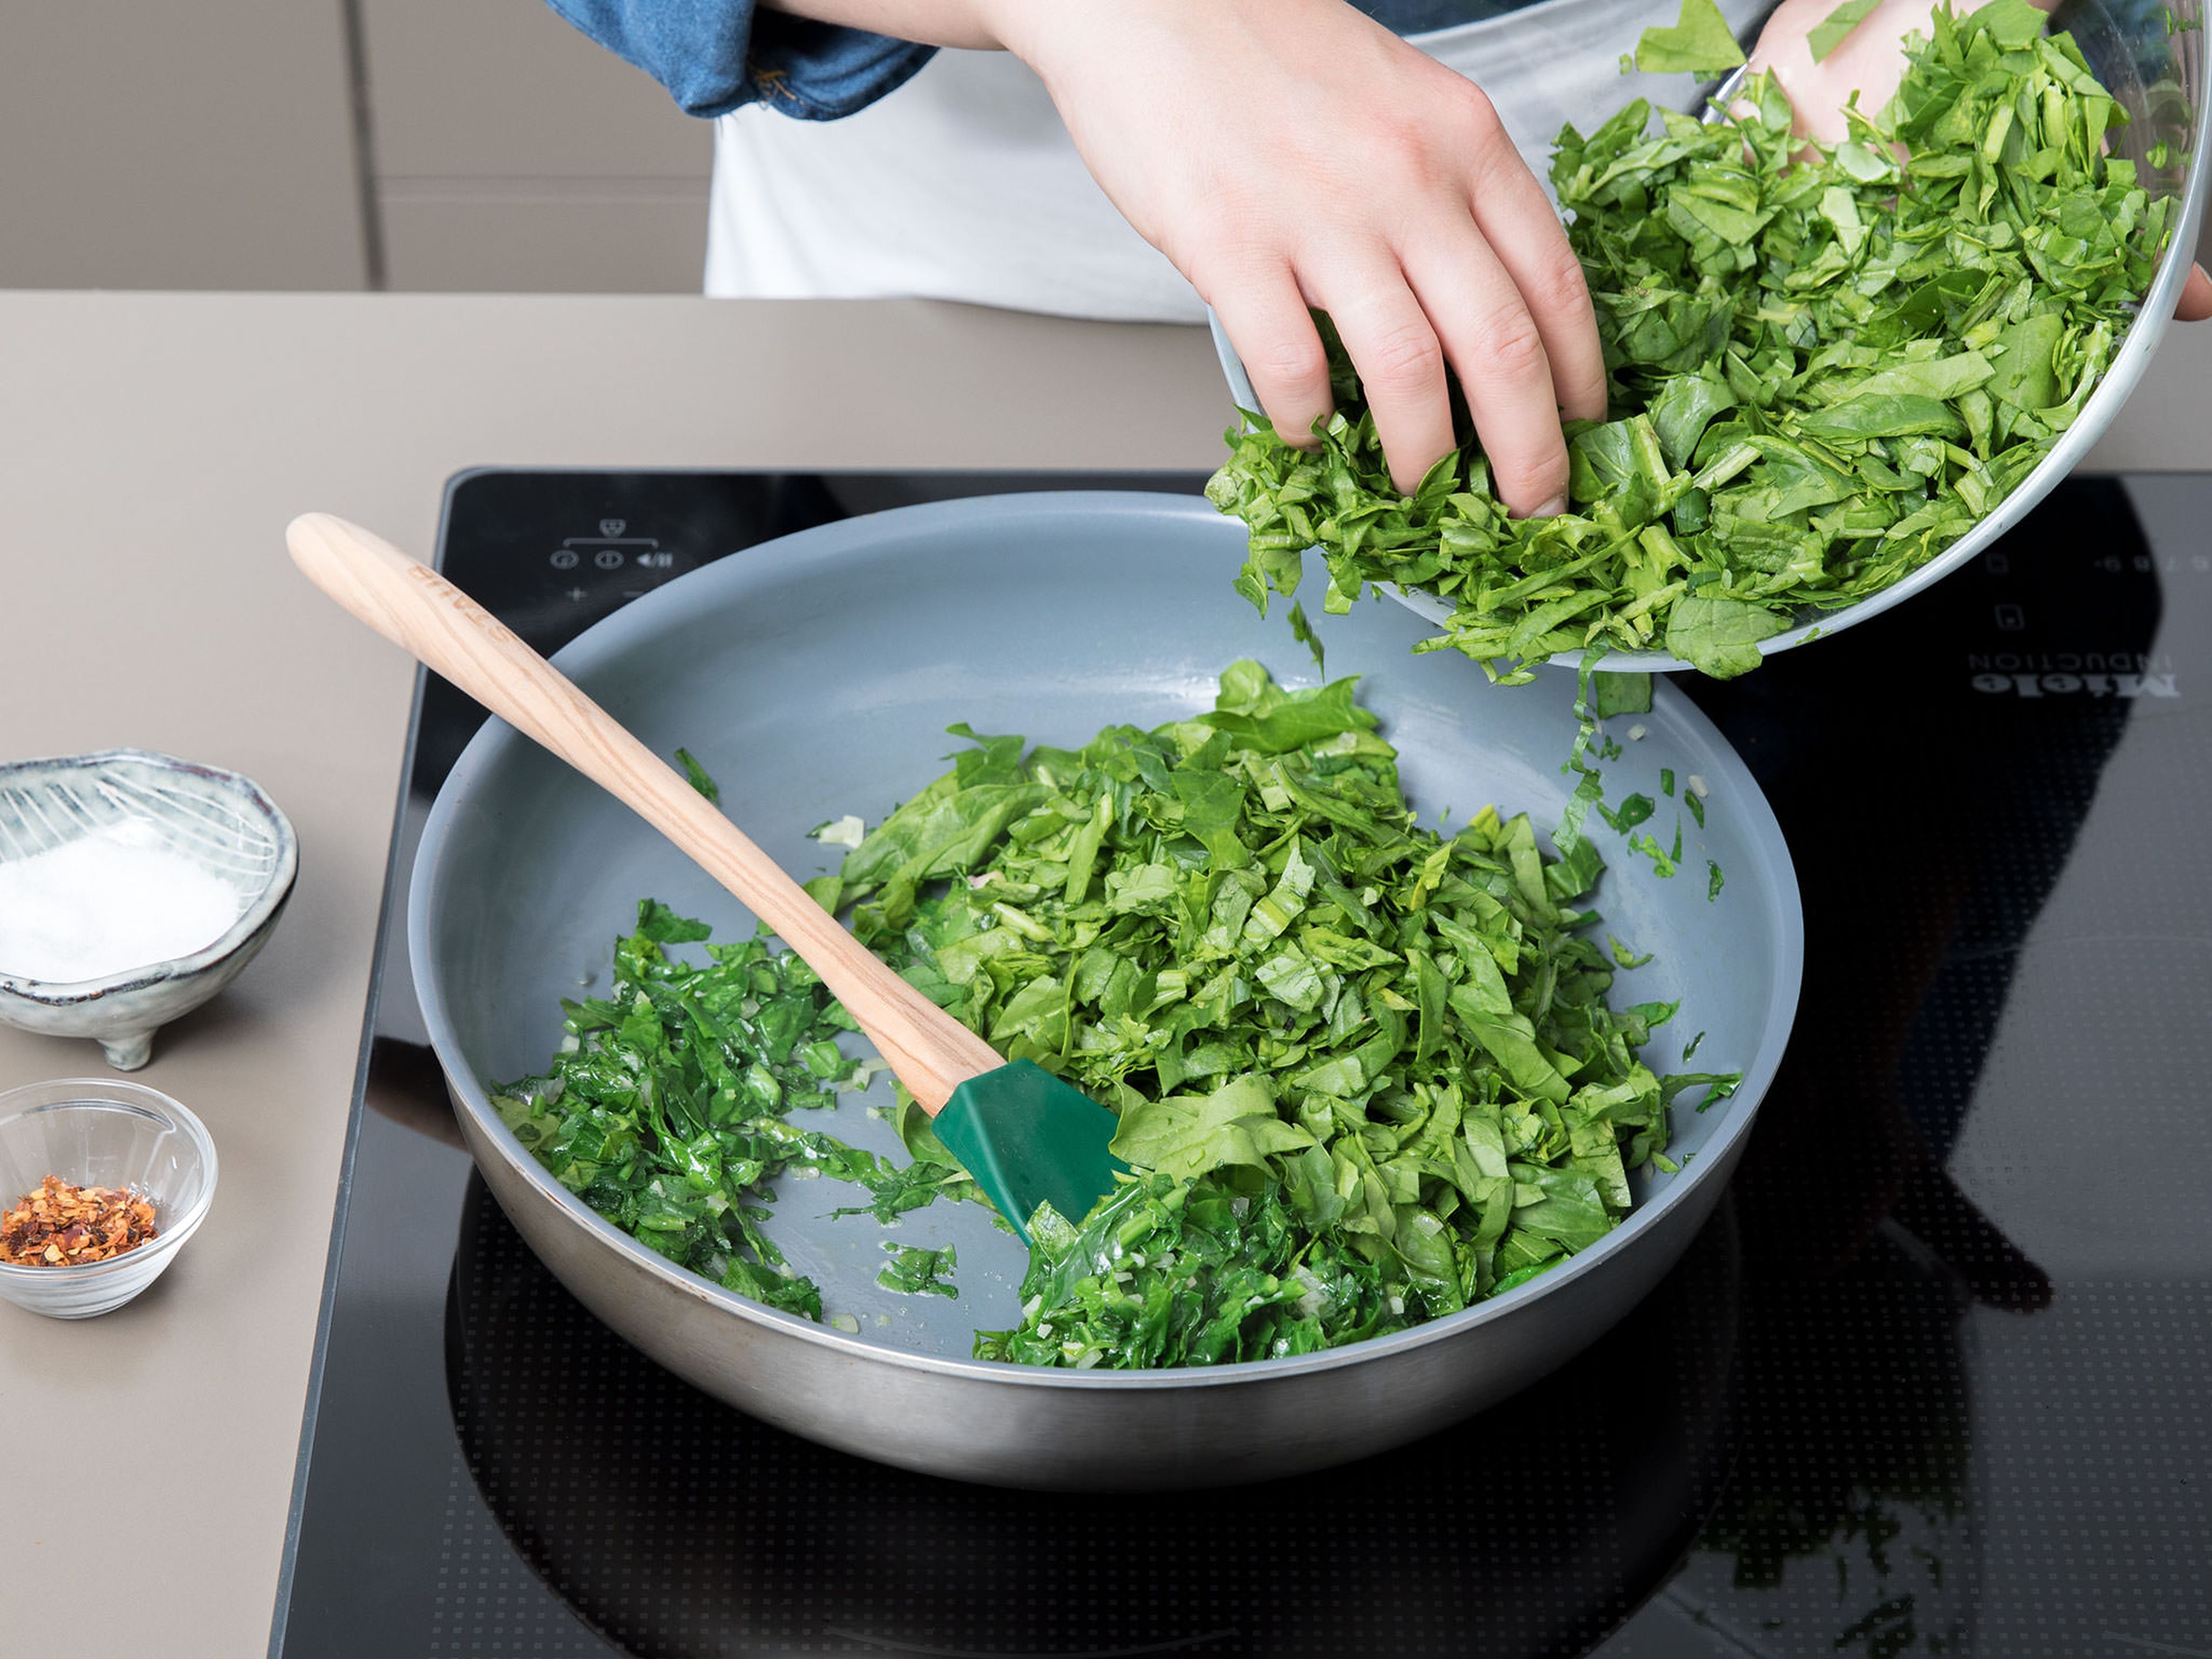 Add the chopped spinach to the frying pan. Sprinkle with chili flakes. Sauté for approx. 3 min., stirring frequently. Once all the liquid has evaporated, add the artichokes, and season with salt and pepper. Let cook for approx. 2 min. more.